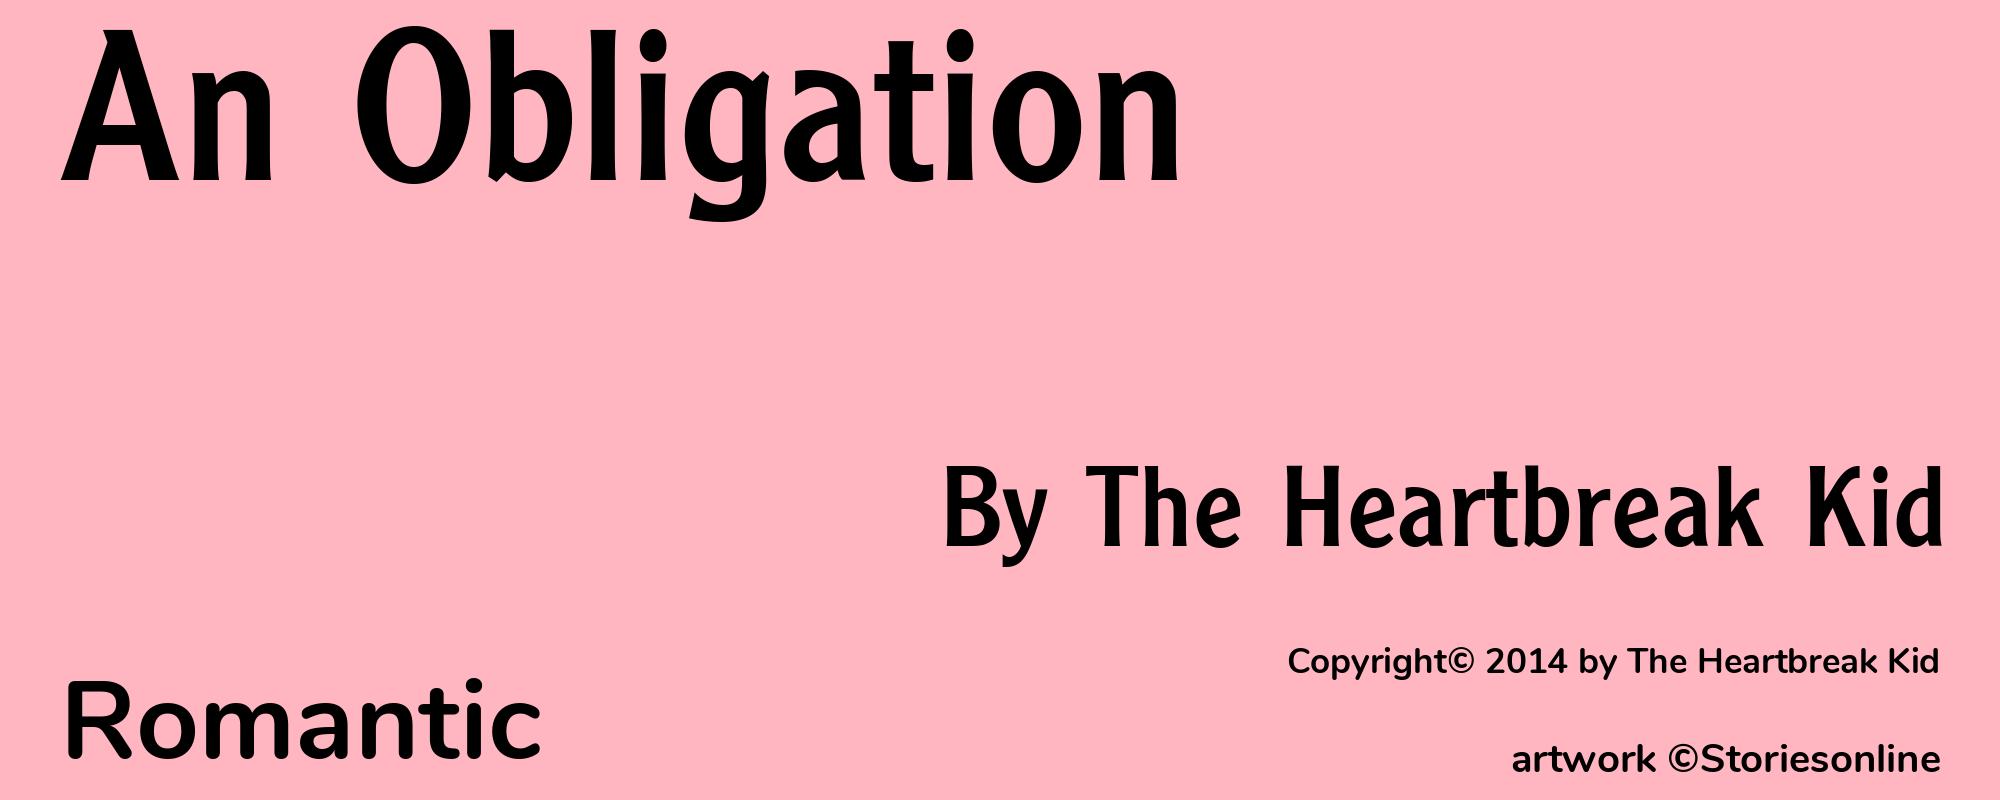 An Obligation - Cover